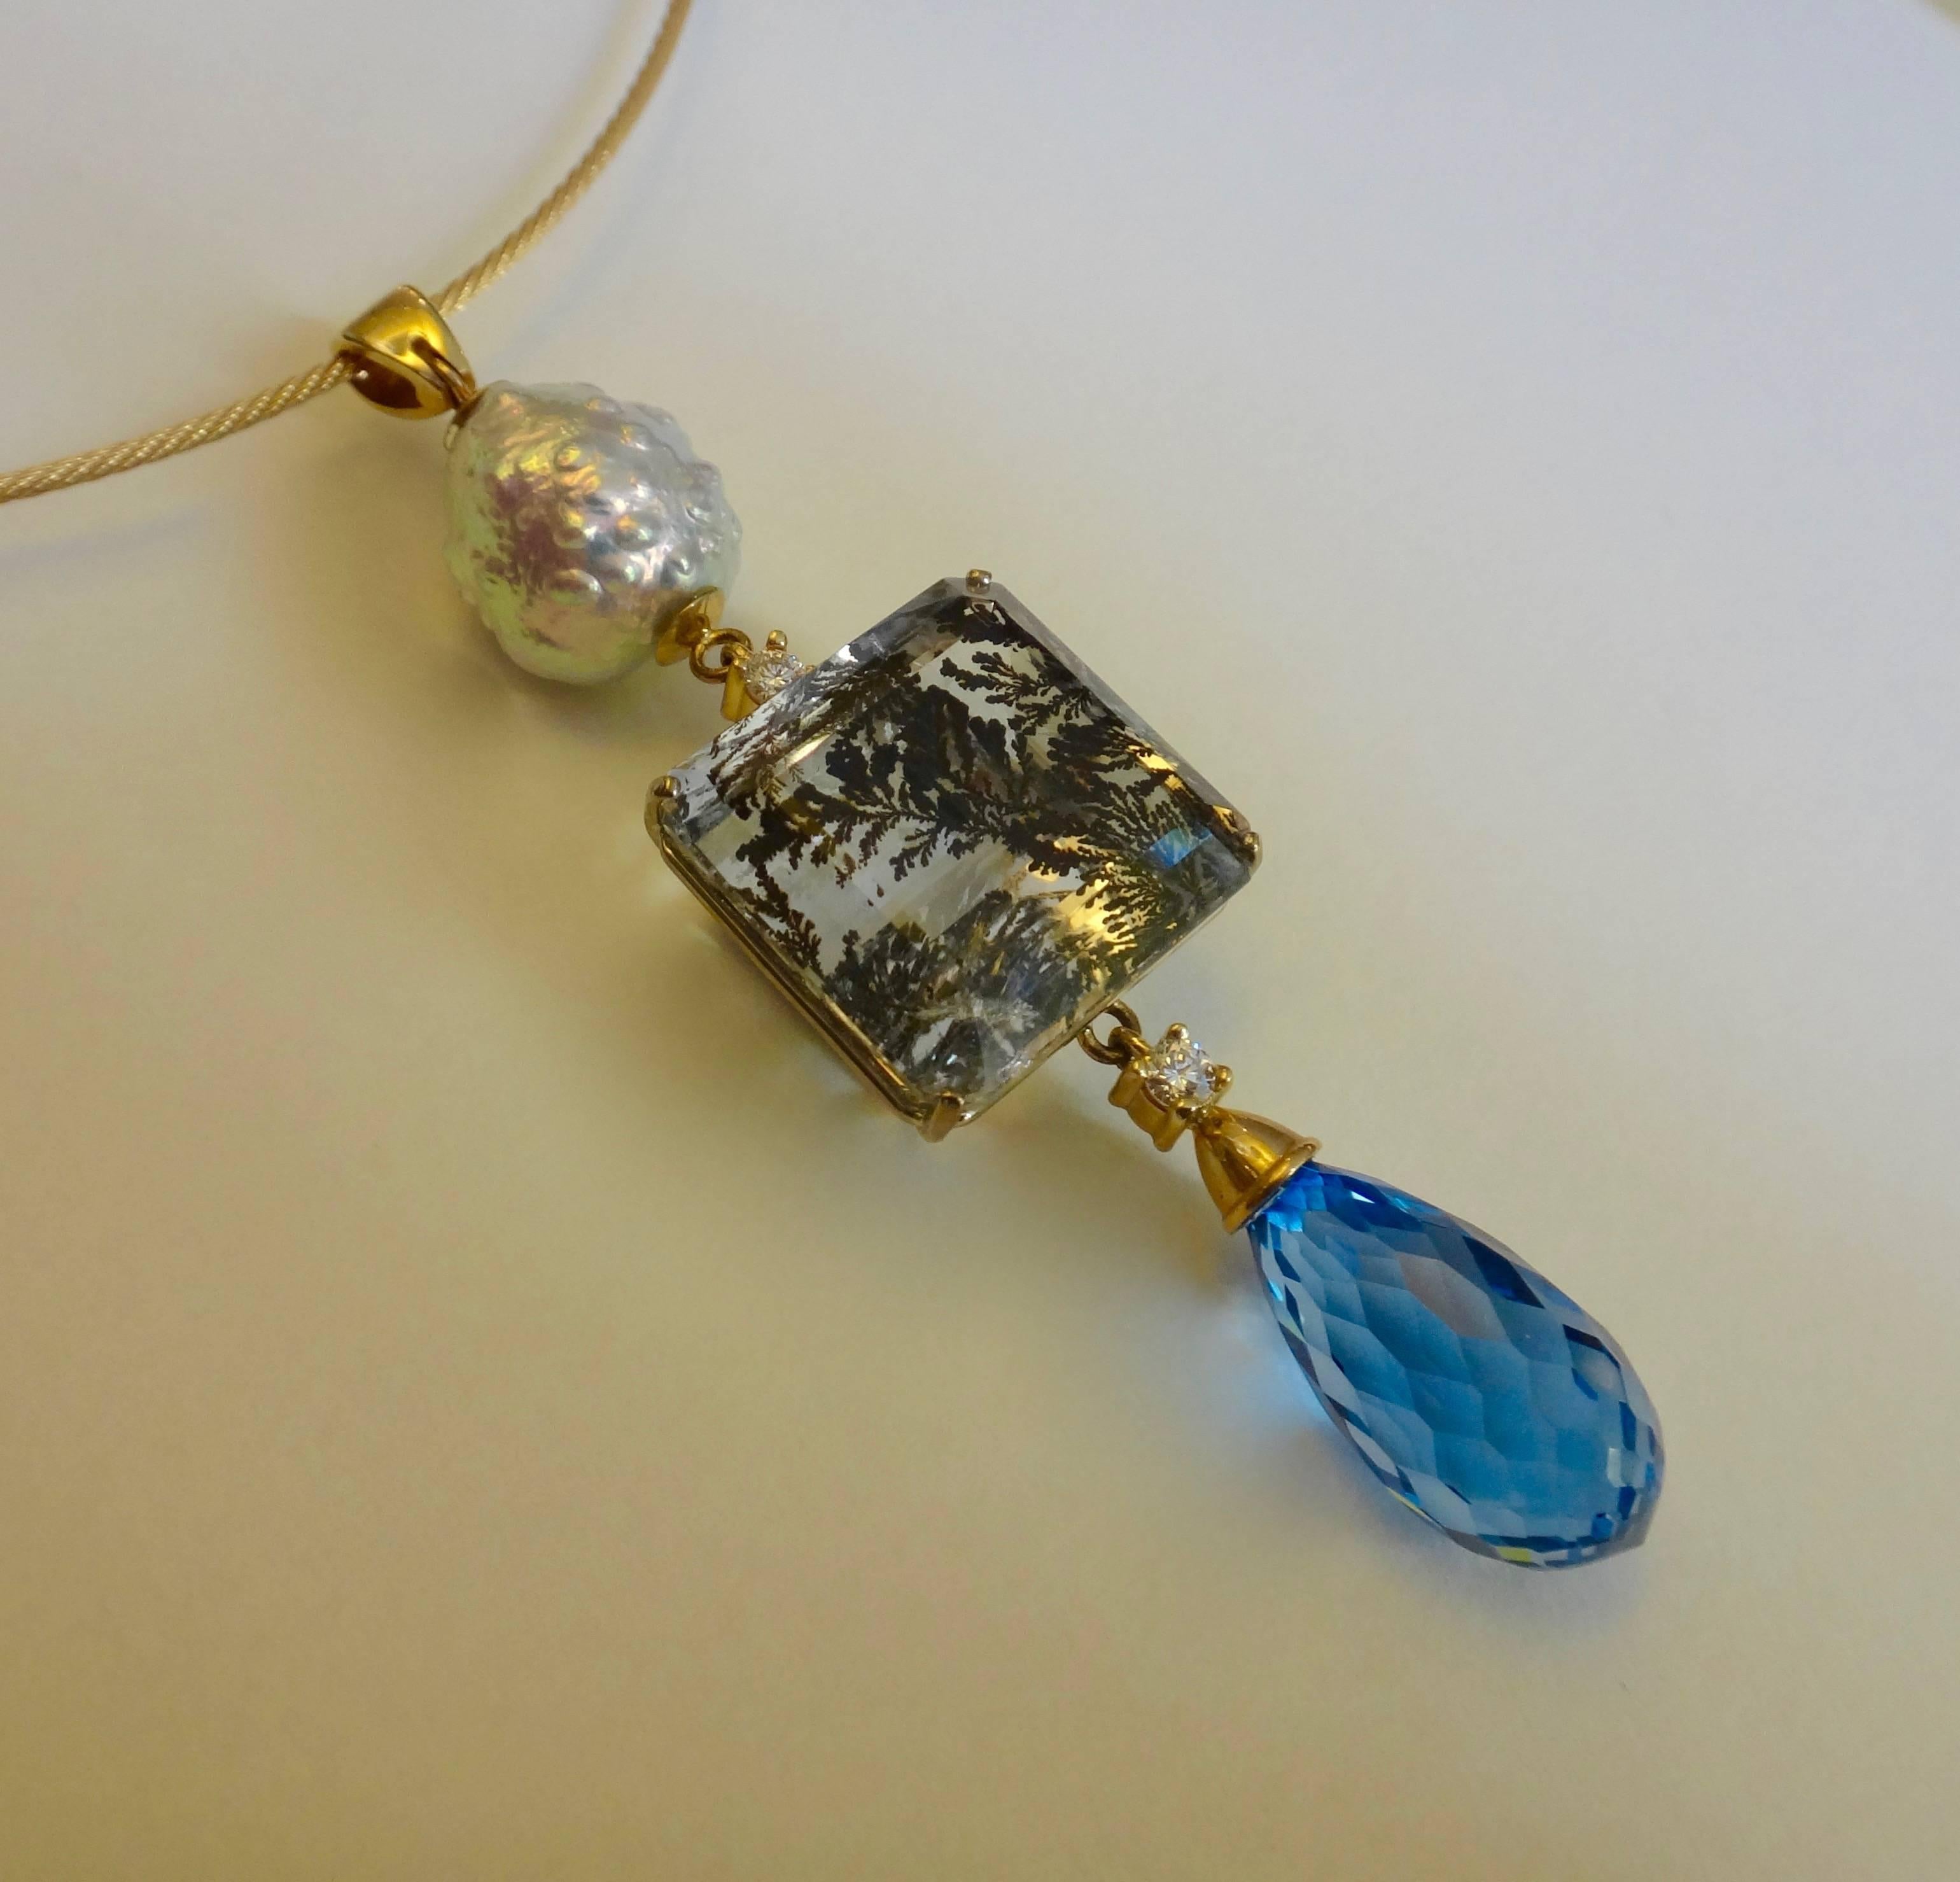 A rare and fabulous dendritic quartz is the featured centerpiece in this pendant.  The fern-like inclusions are formed from captured iron oxide within the clear quartz.  Enhancing the center stone is a metallic finished Kasumi pearl, a blue topaz